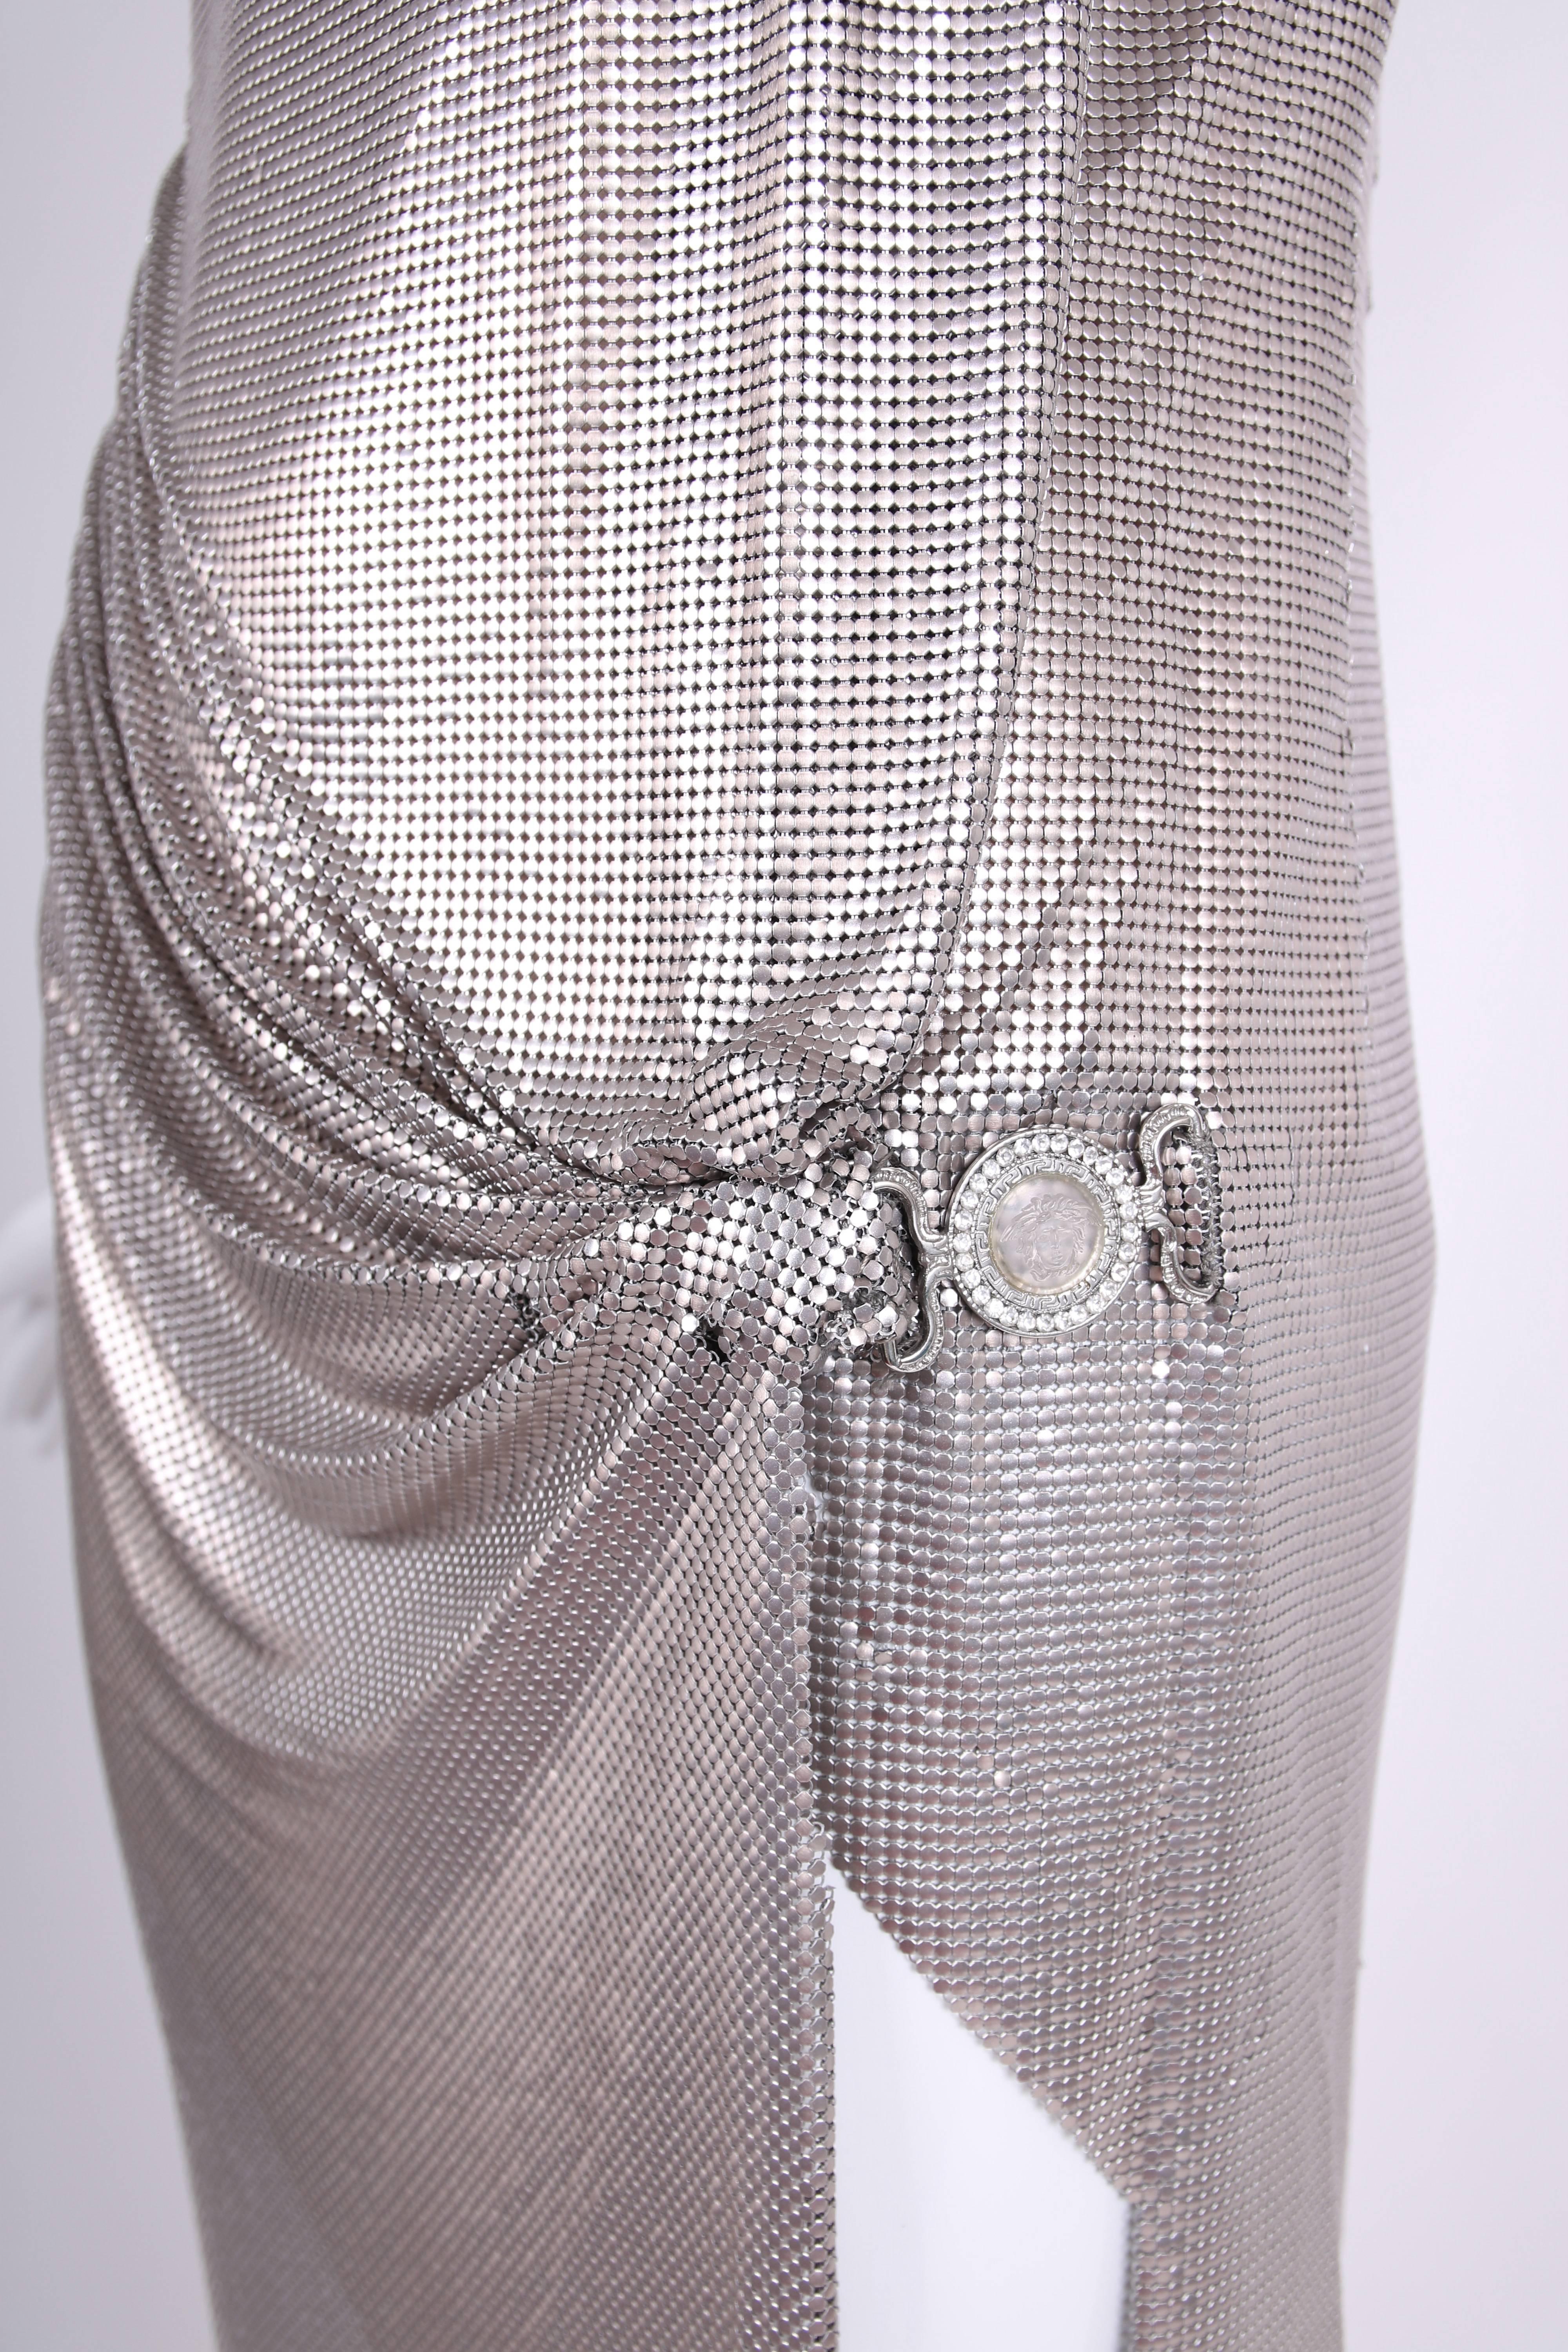 Gianni Versace Couture Oroton Silver Chainmail Gown w/Thigh-High Slit 1998 S/S In Excellent Condition In Studio City, CA